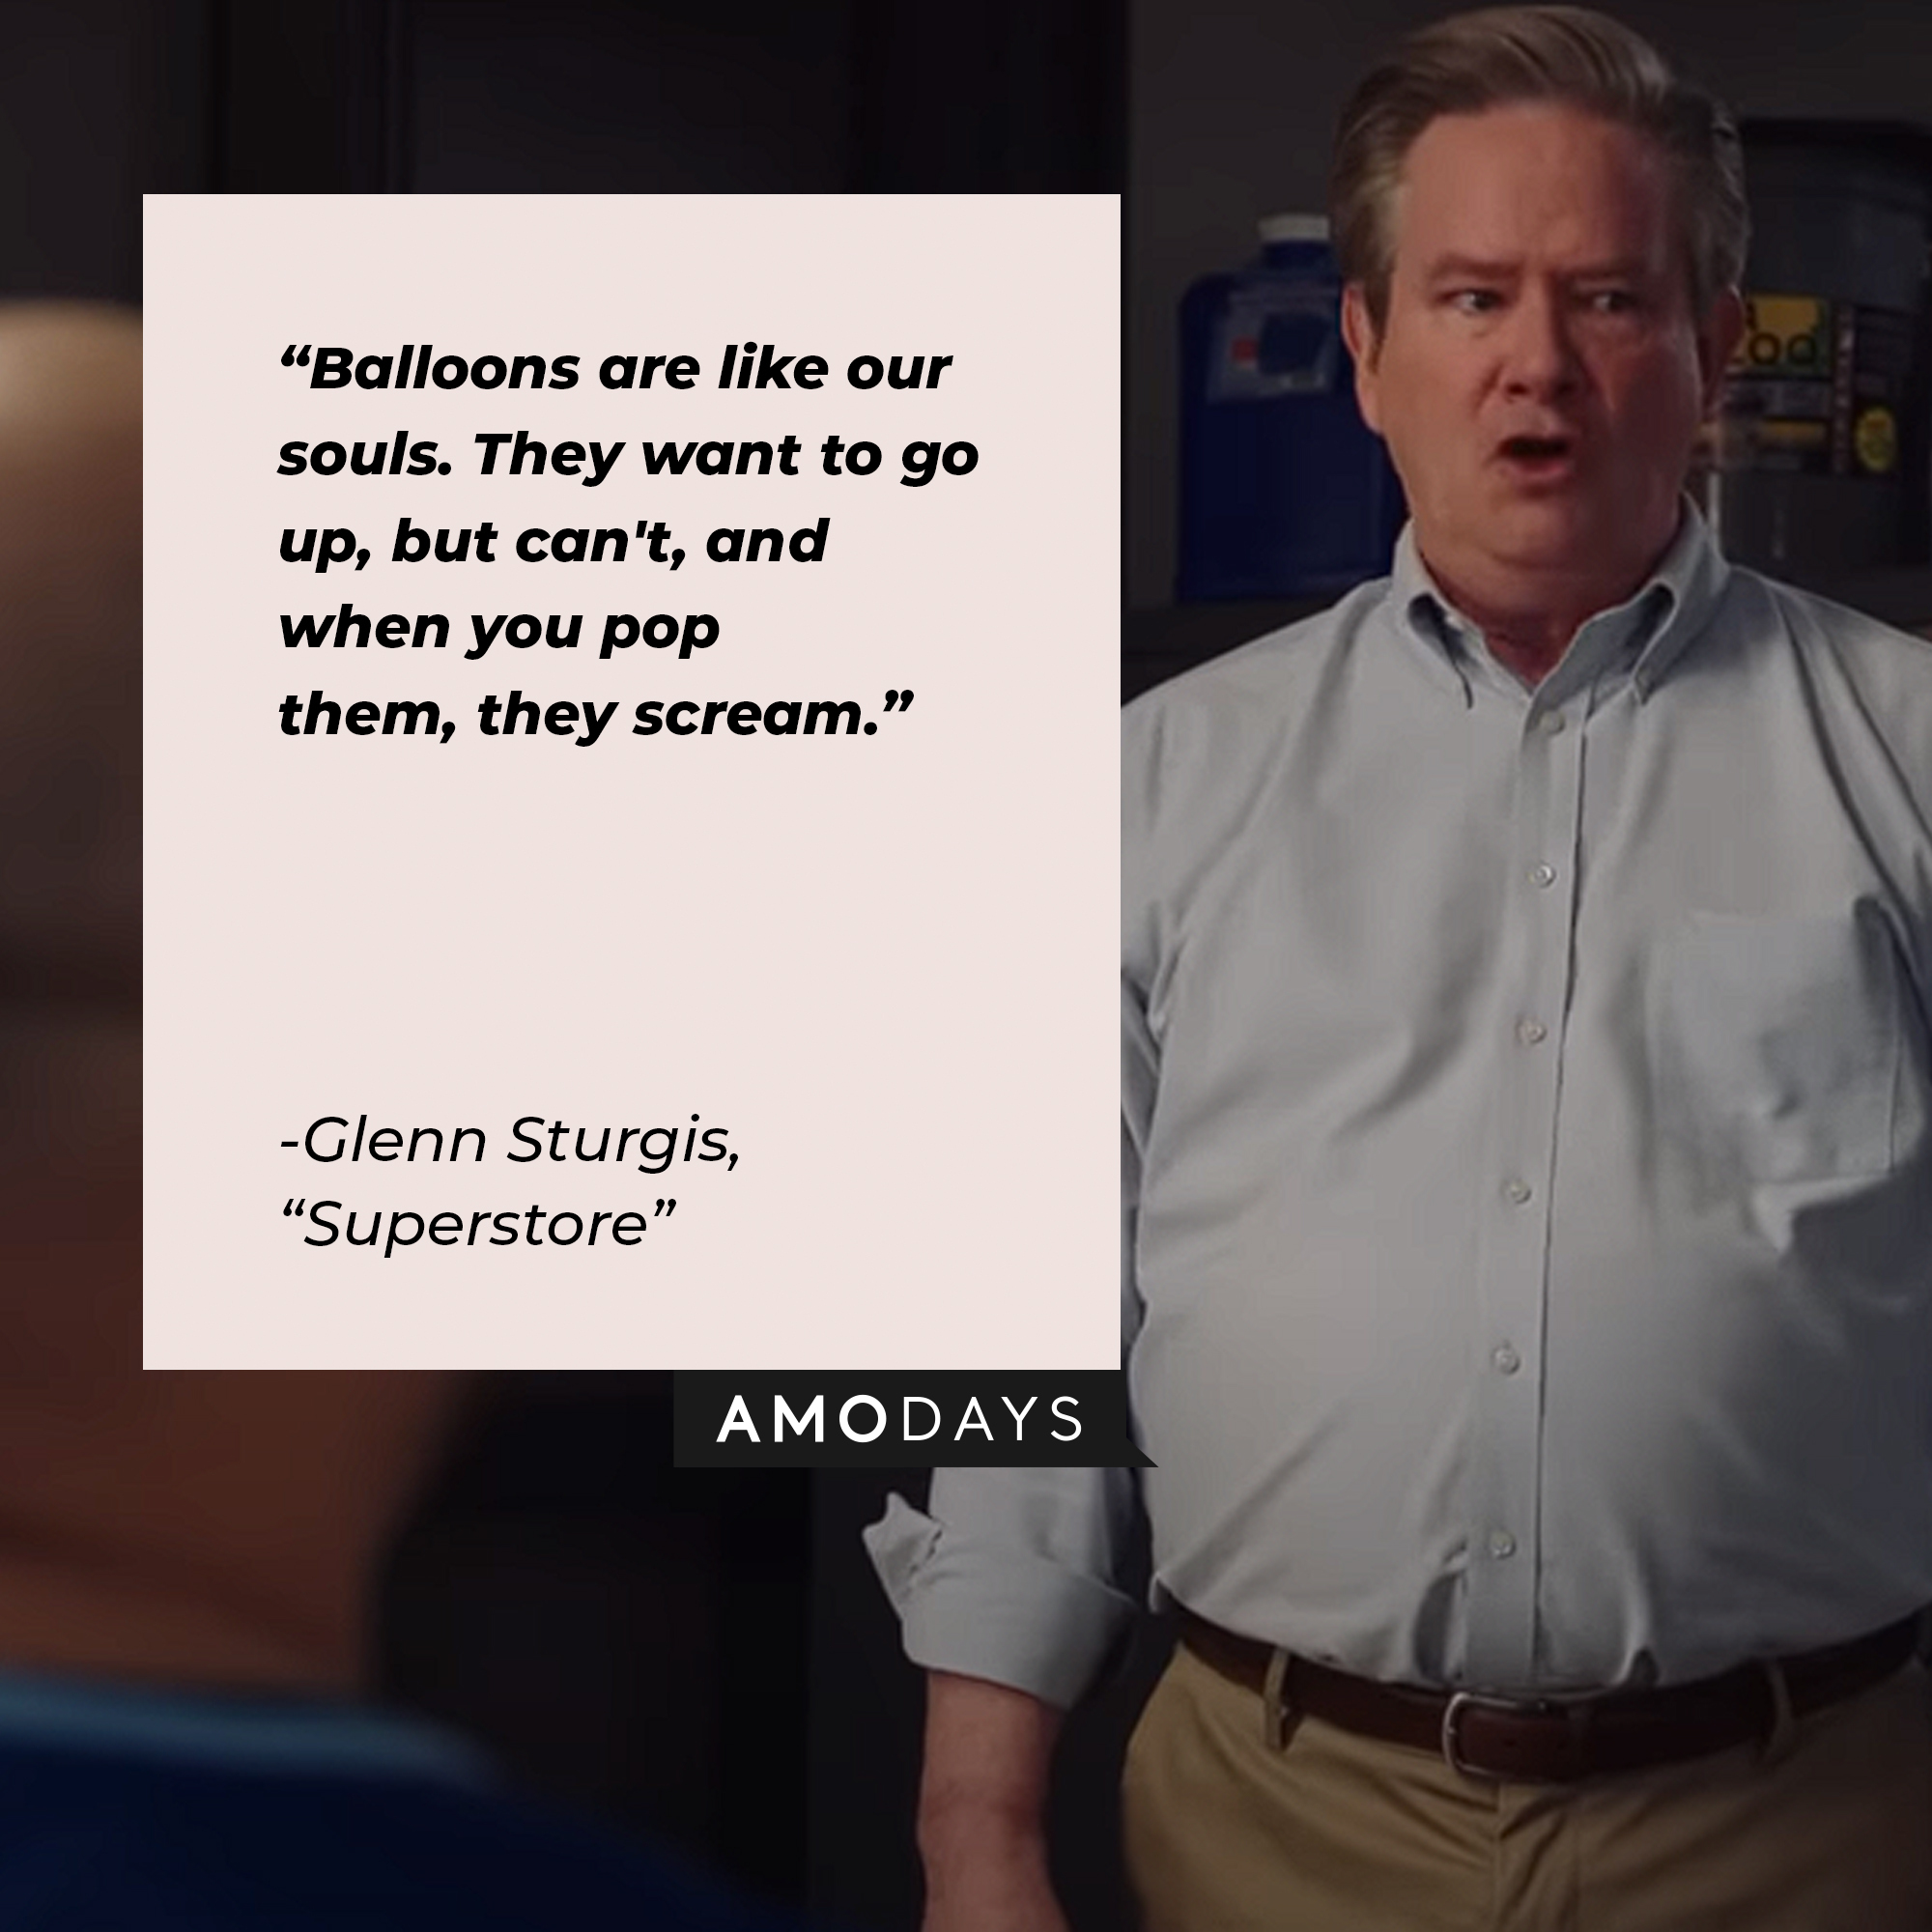 Image of Glenn Sturgis with the quote: “Balloons are like our souls. They want to go up, but can't, and when you pop them, they scream.” | Source: Youtube.com/NBCSuperstore